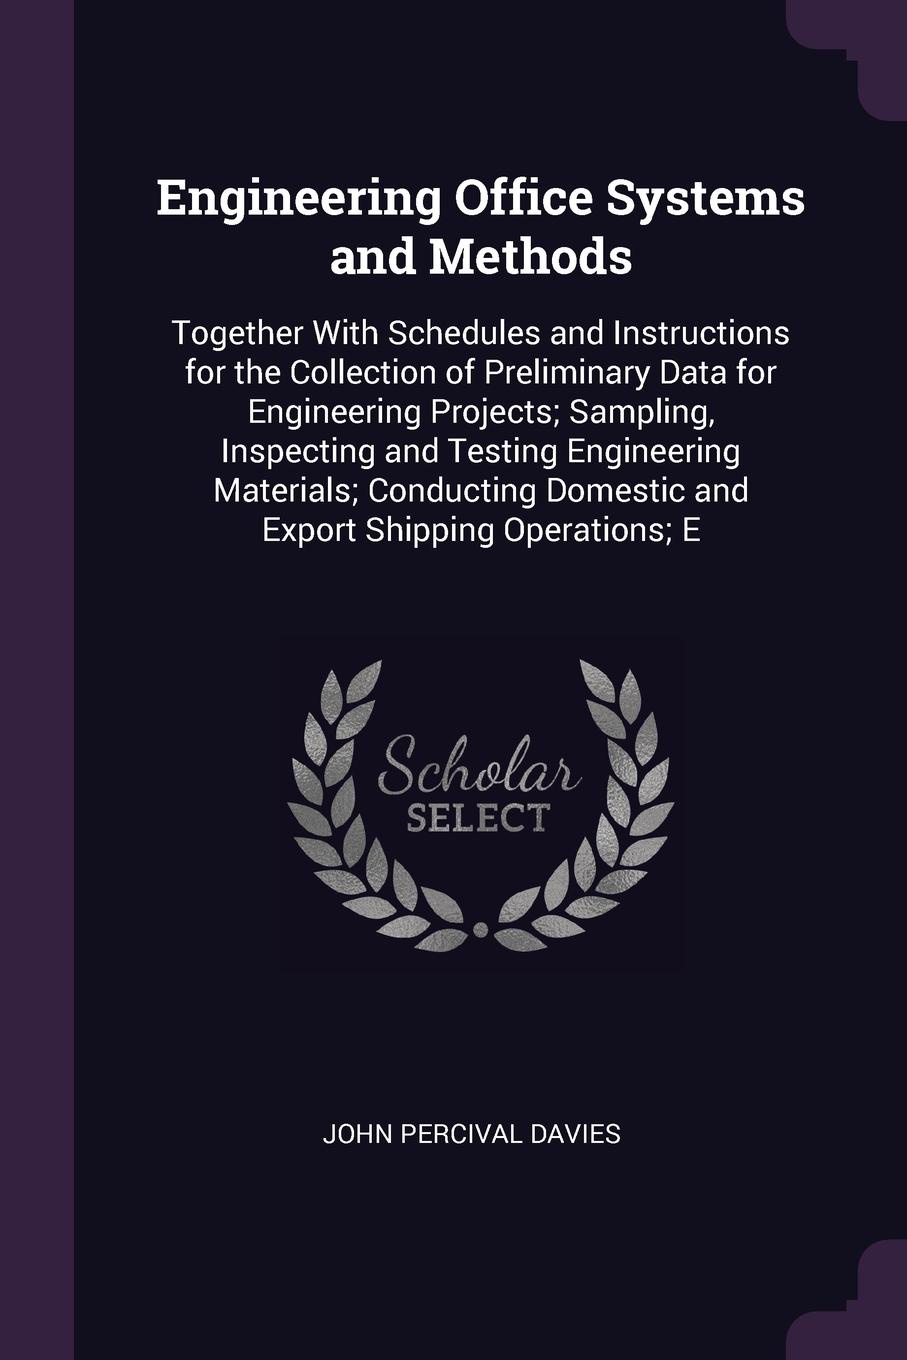 Engineering Office Systems and Methods. Together With Schedules and Instructions for the Collection of Preliminary Data for Engineering Projects; Sampling, Inspecting and Testing Engineering Materials; Conducting Domestic and Export Shipping Opera...